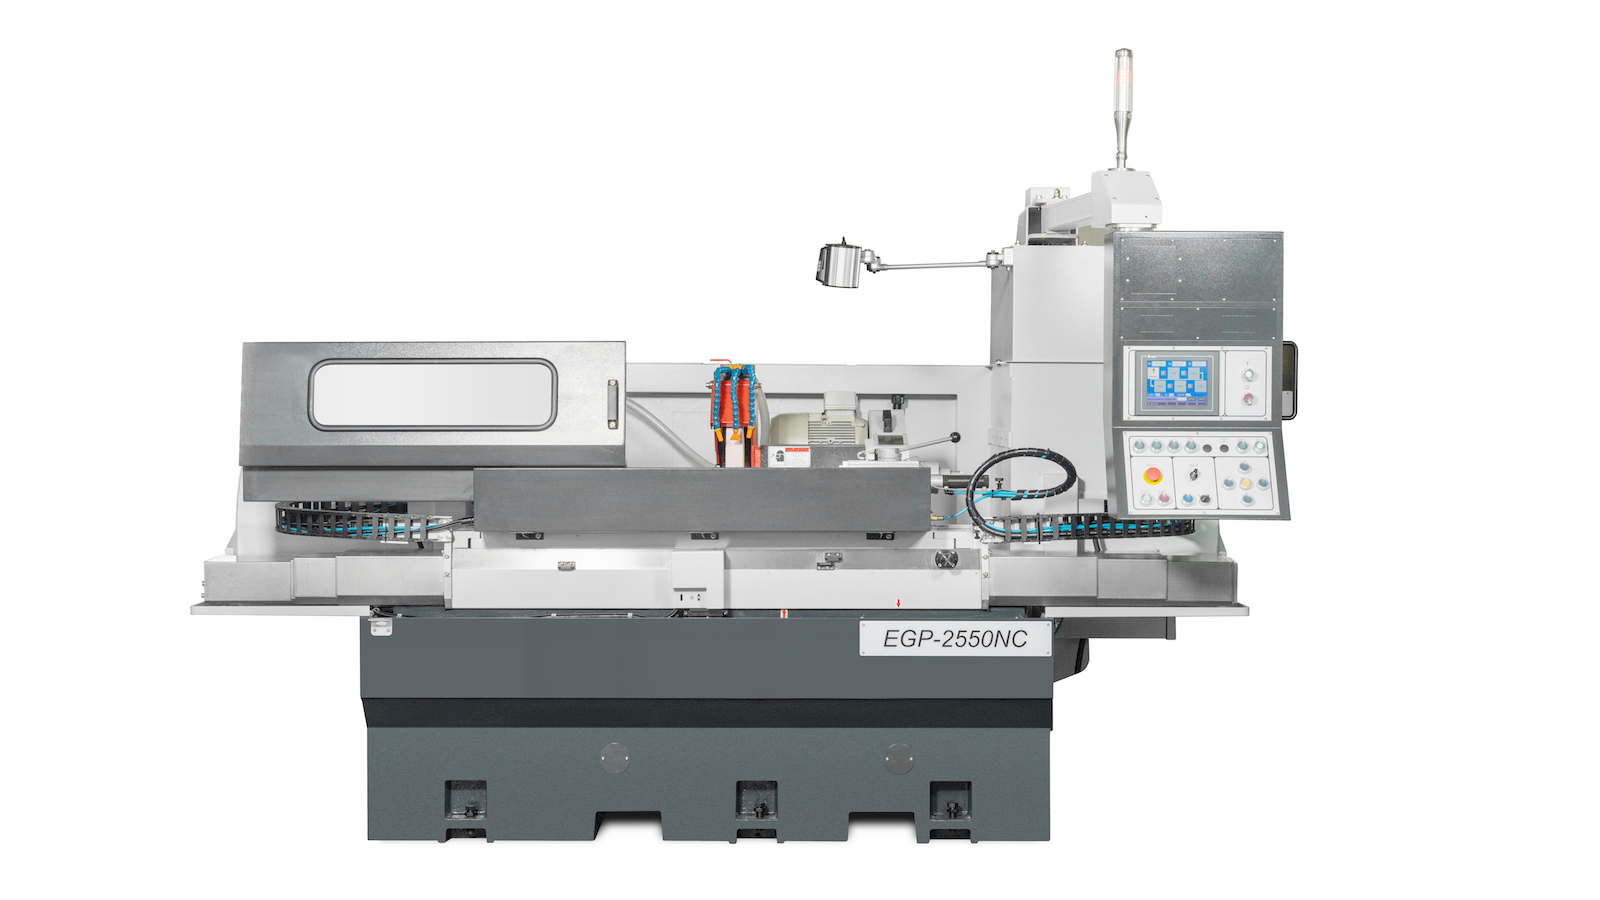 Manufacturers of Automatic Infeed CNC Grinders UK